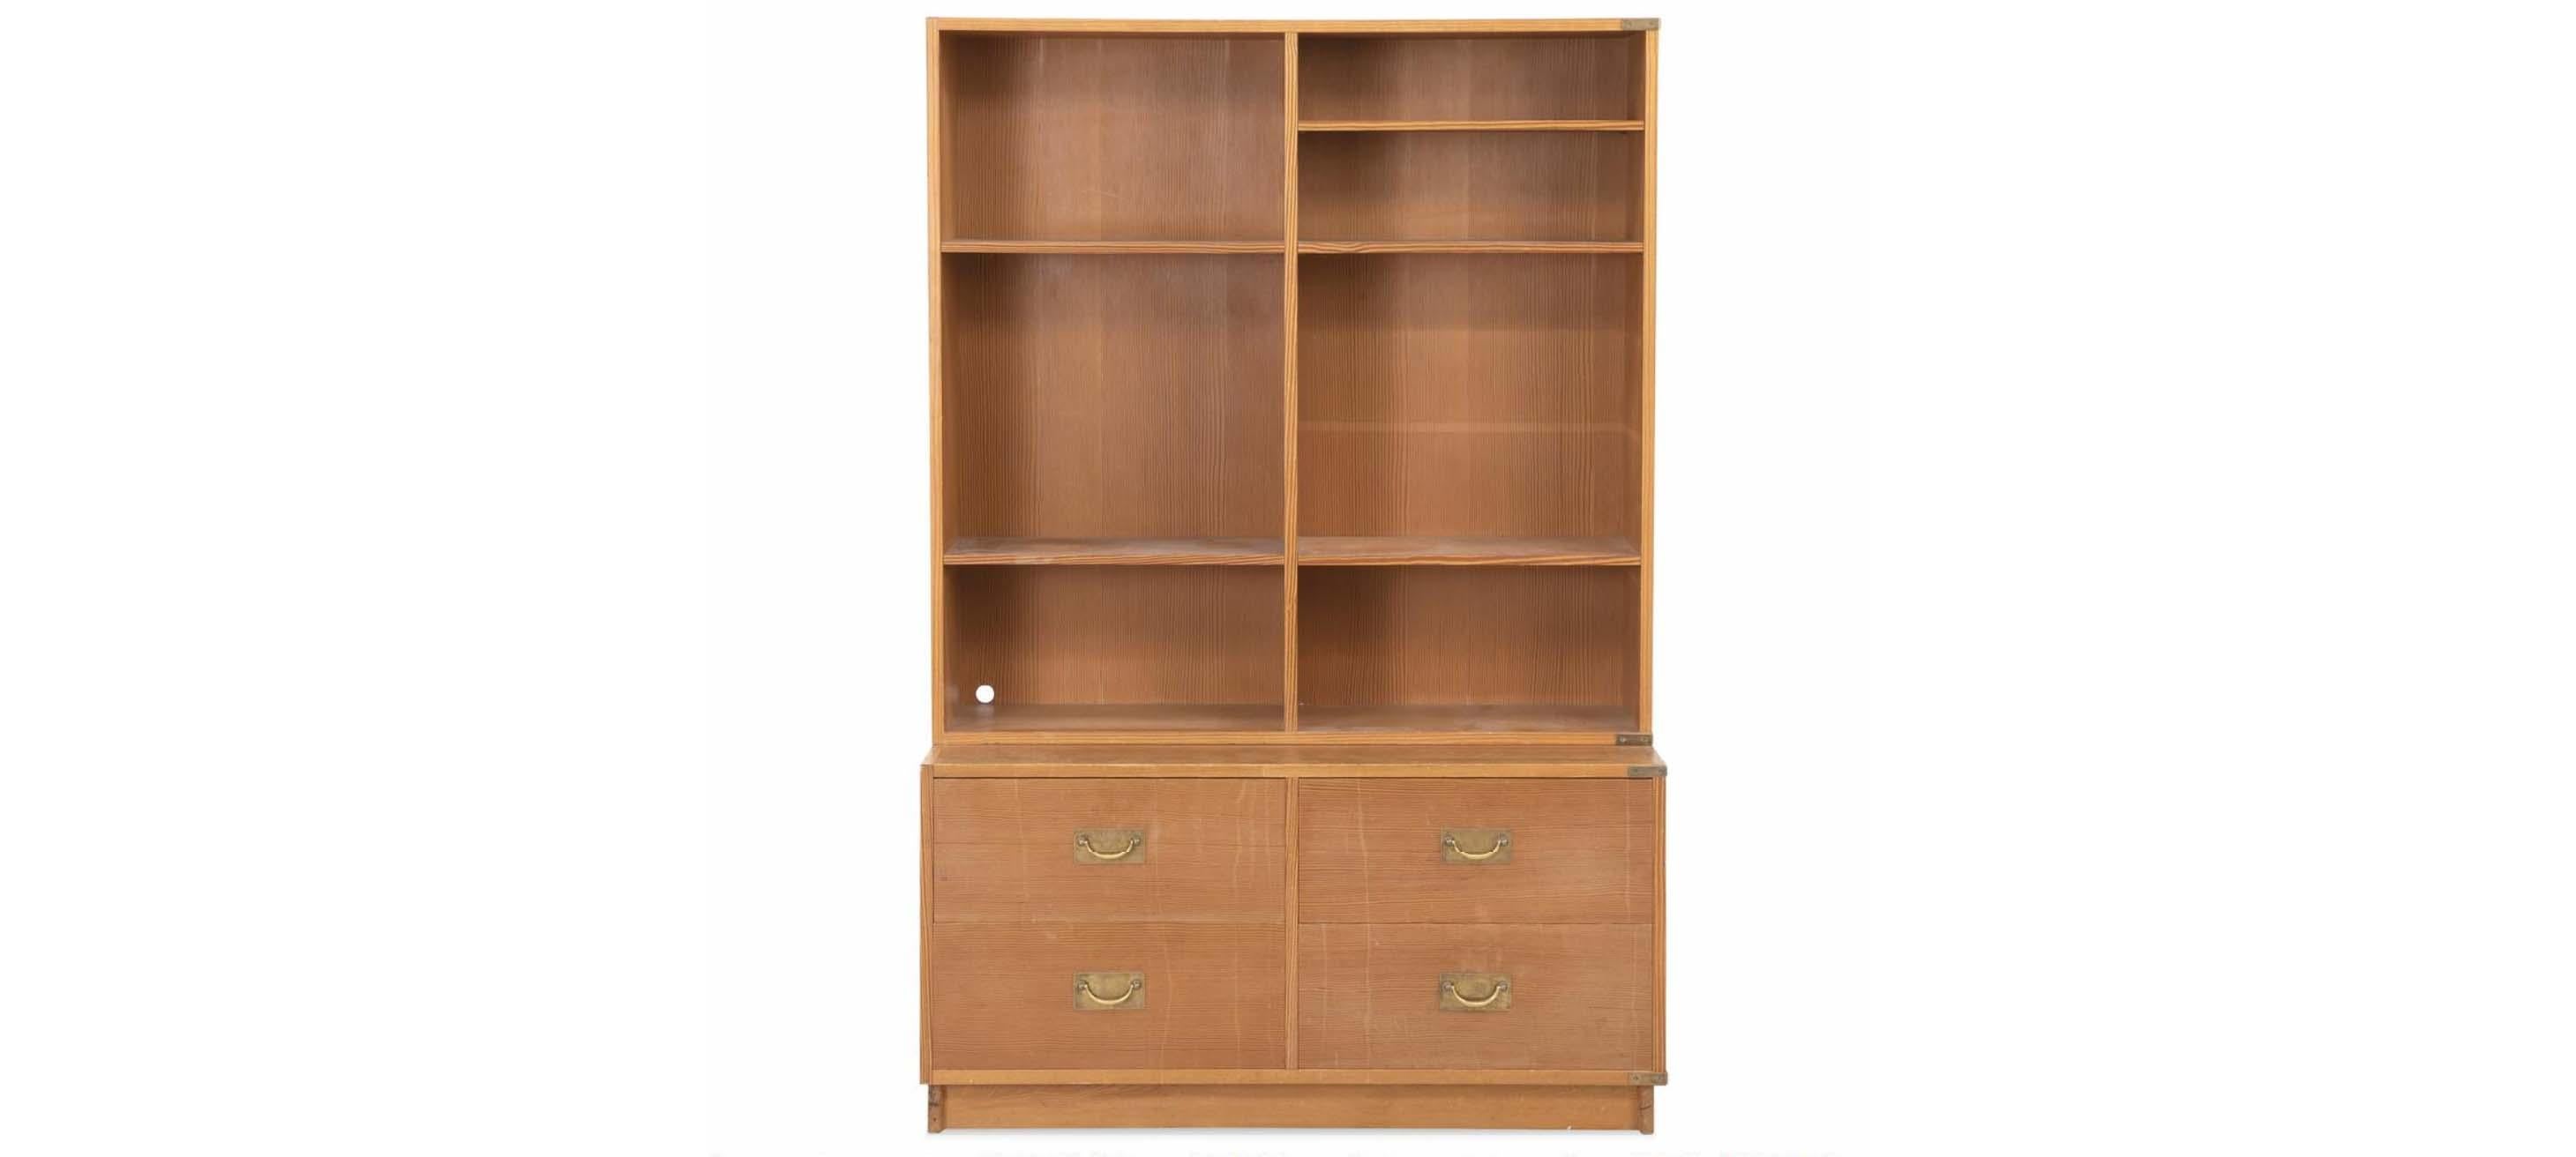 chest of drawers with bookshelf